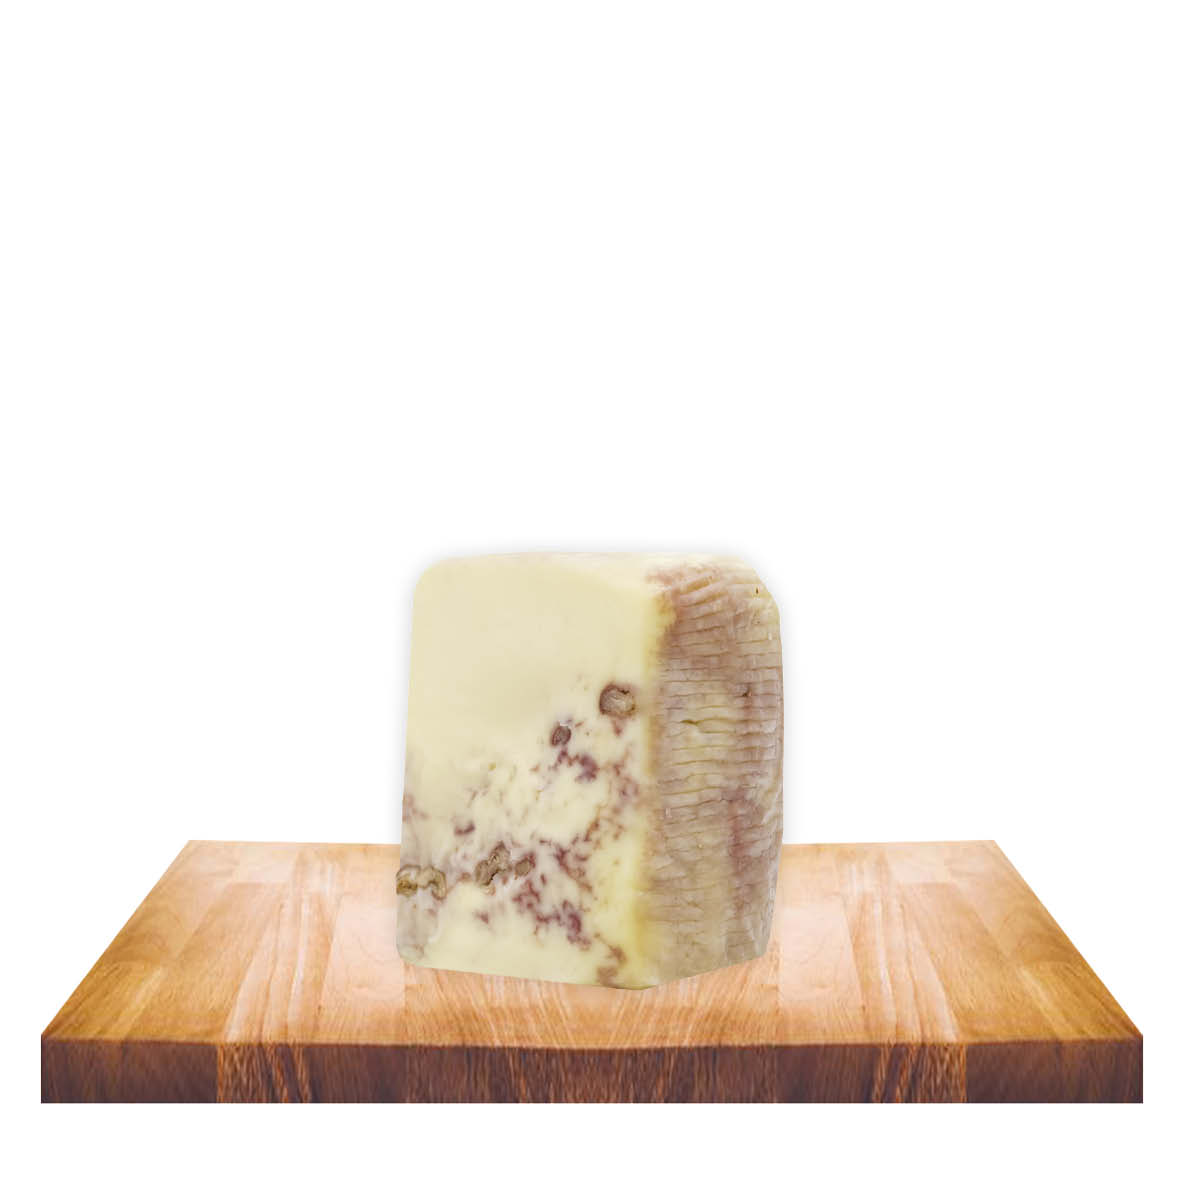 Primo Sale cheese with walnuts